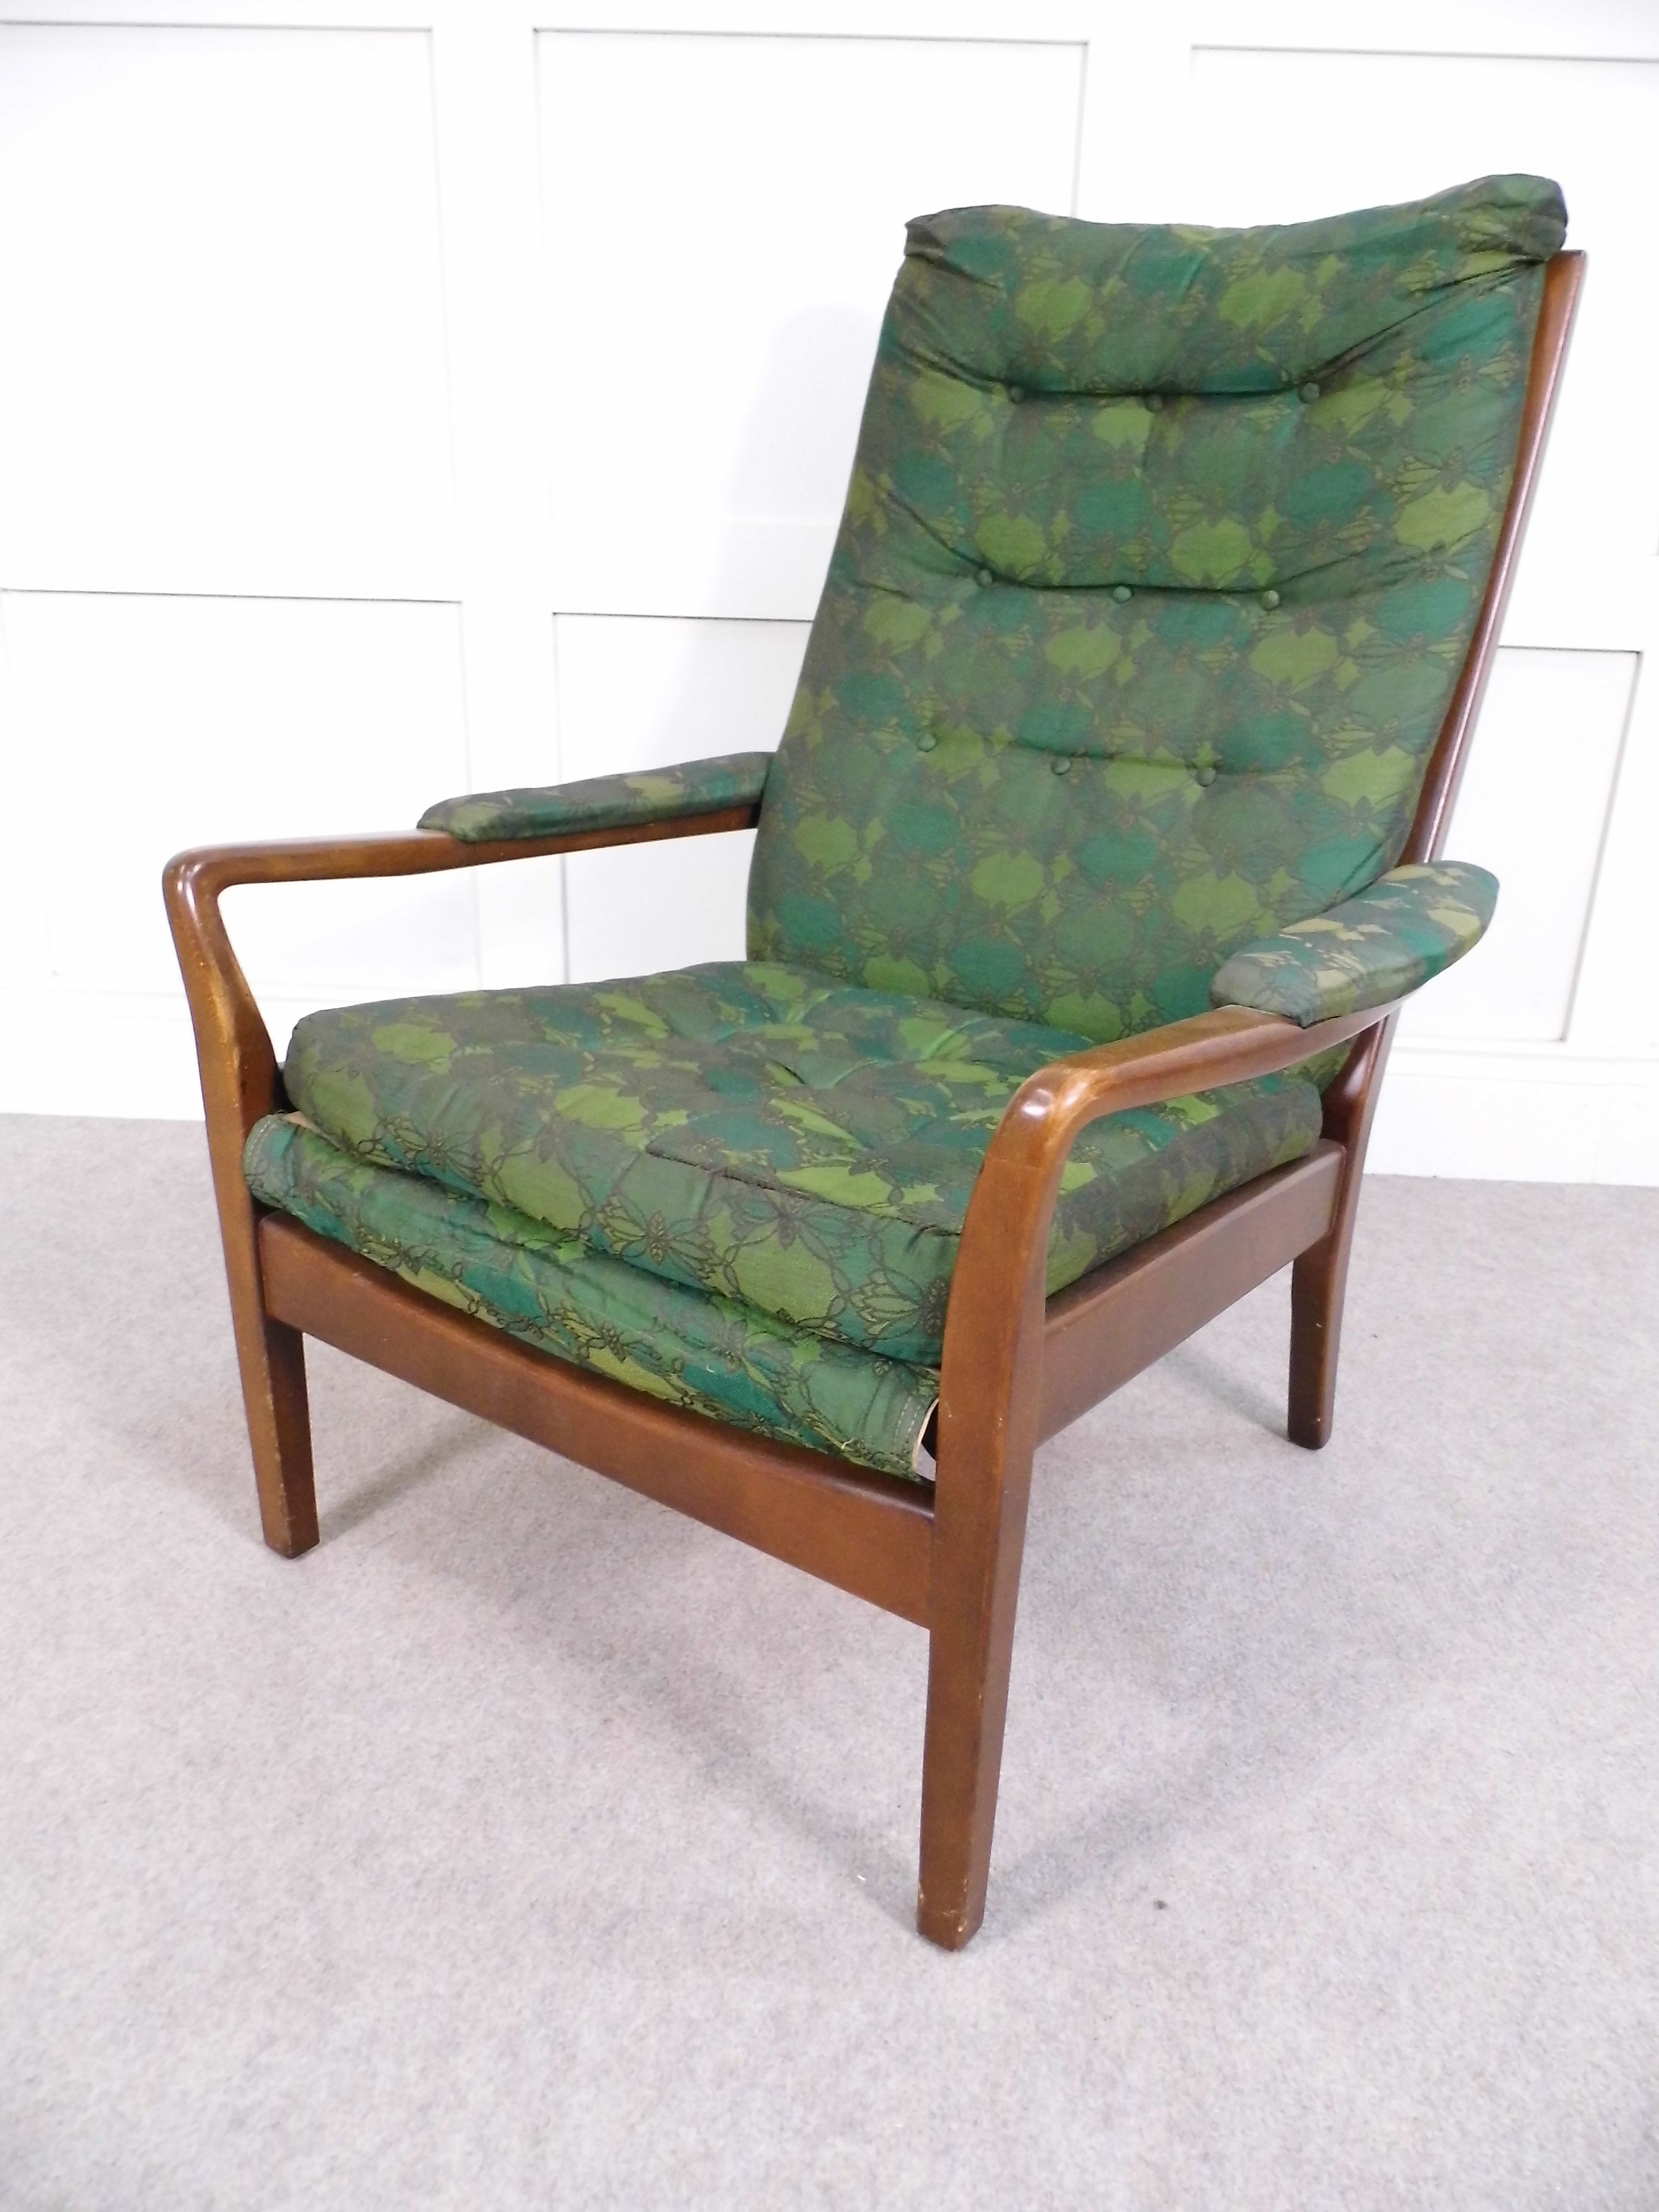 Amazing New Vintage Cintique Armchair With Vintage Retro 1959 Cintique C5 Deluxe Group Chair Mid Century (View 9 of 15)